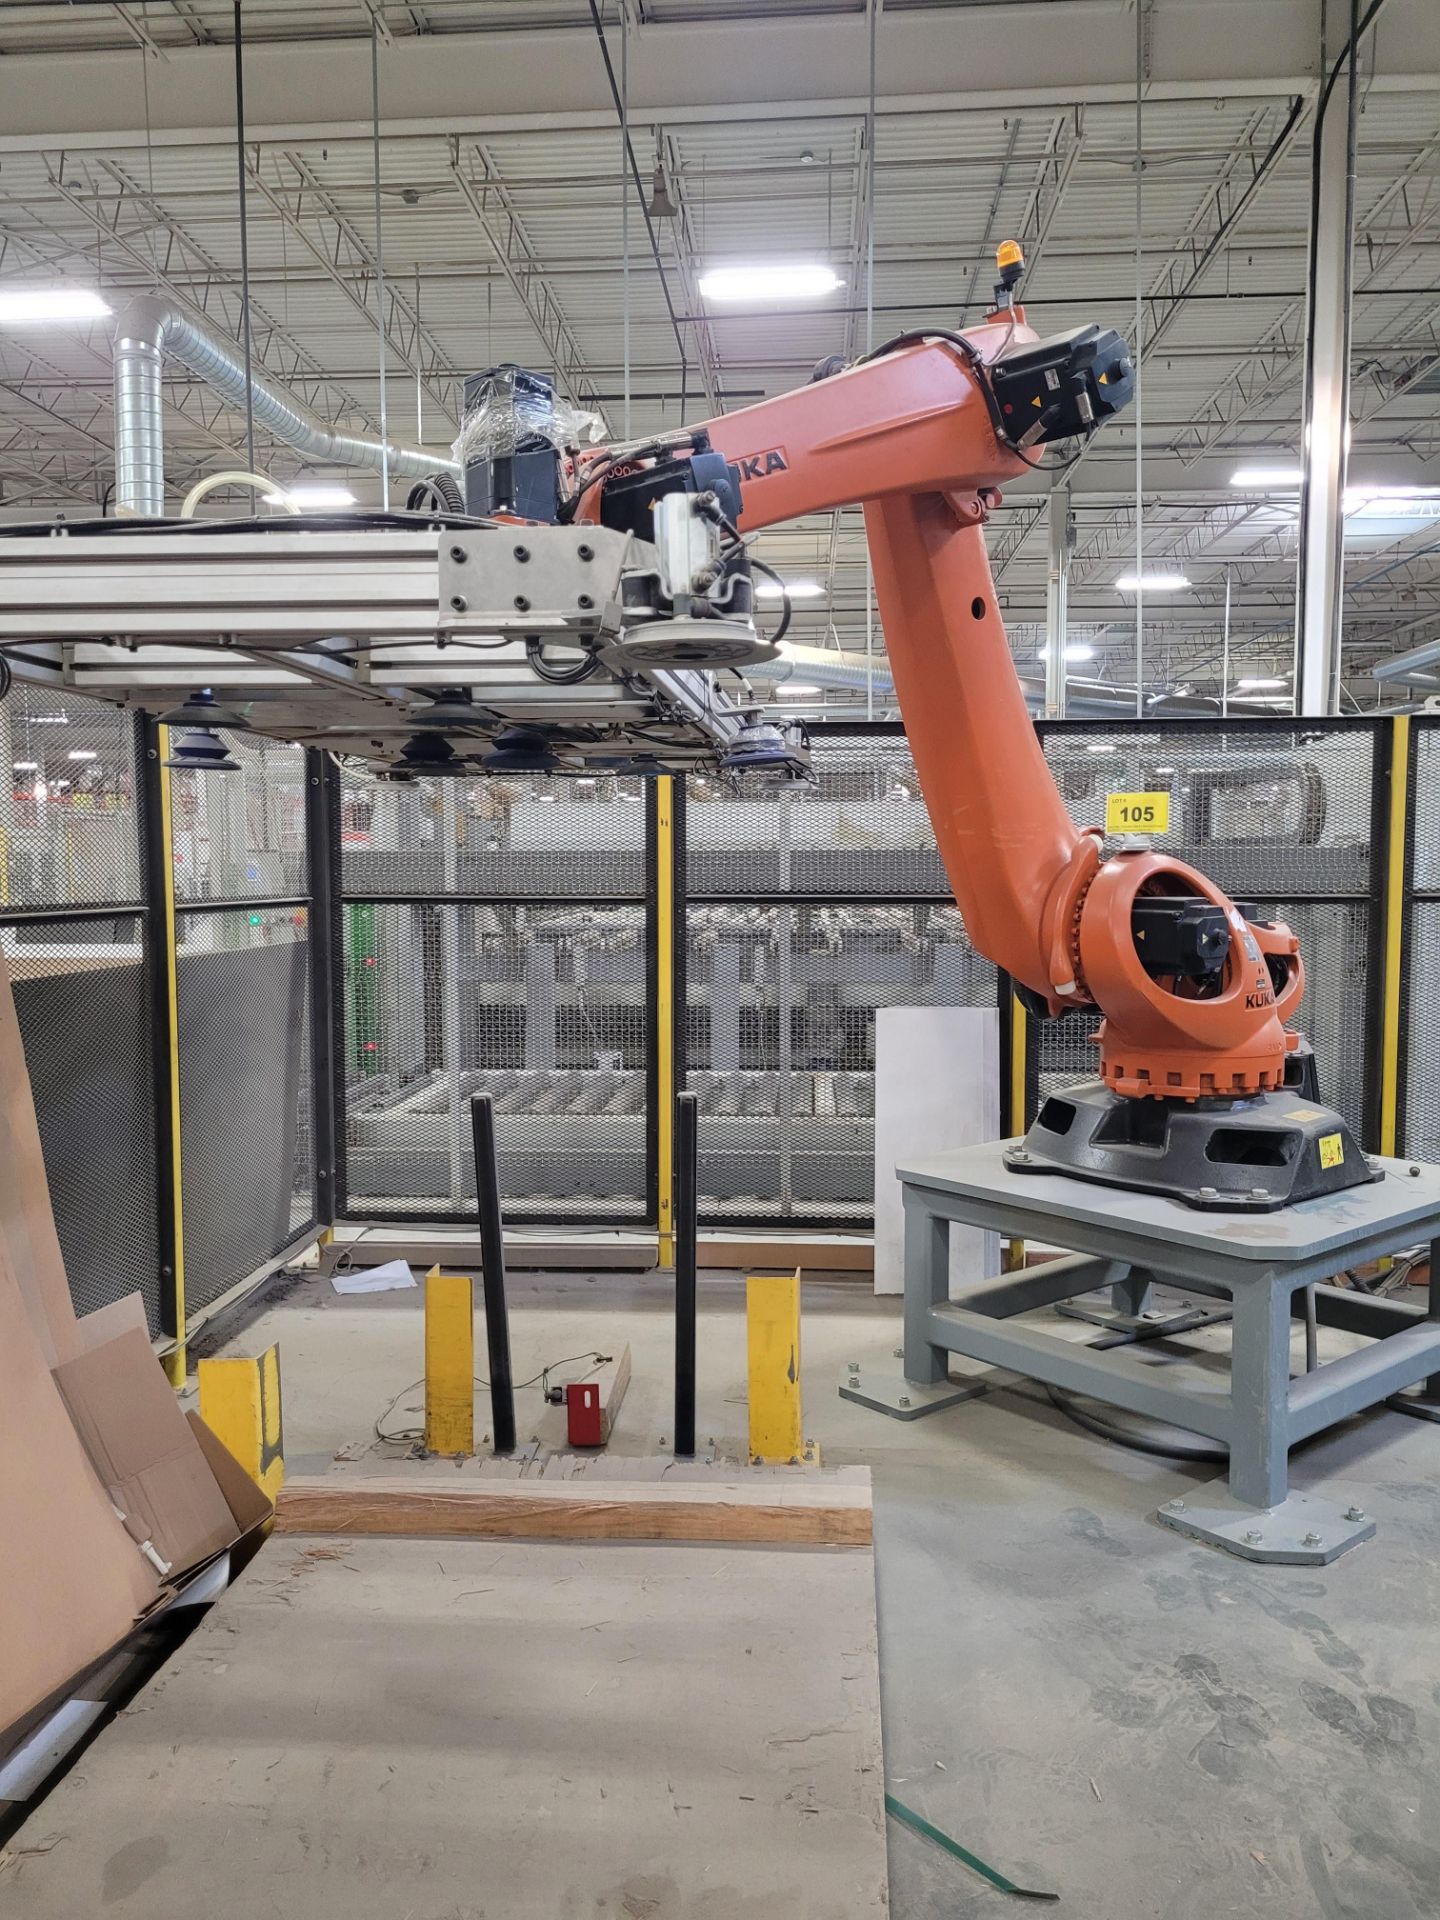 2015 KUKA KR 120 R3200 PA 5-AXIS ROBOTIC PALLETIZING / LABEL SYSTEM, 120KG LOAD CAPACITY, 3195MM MAX